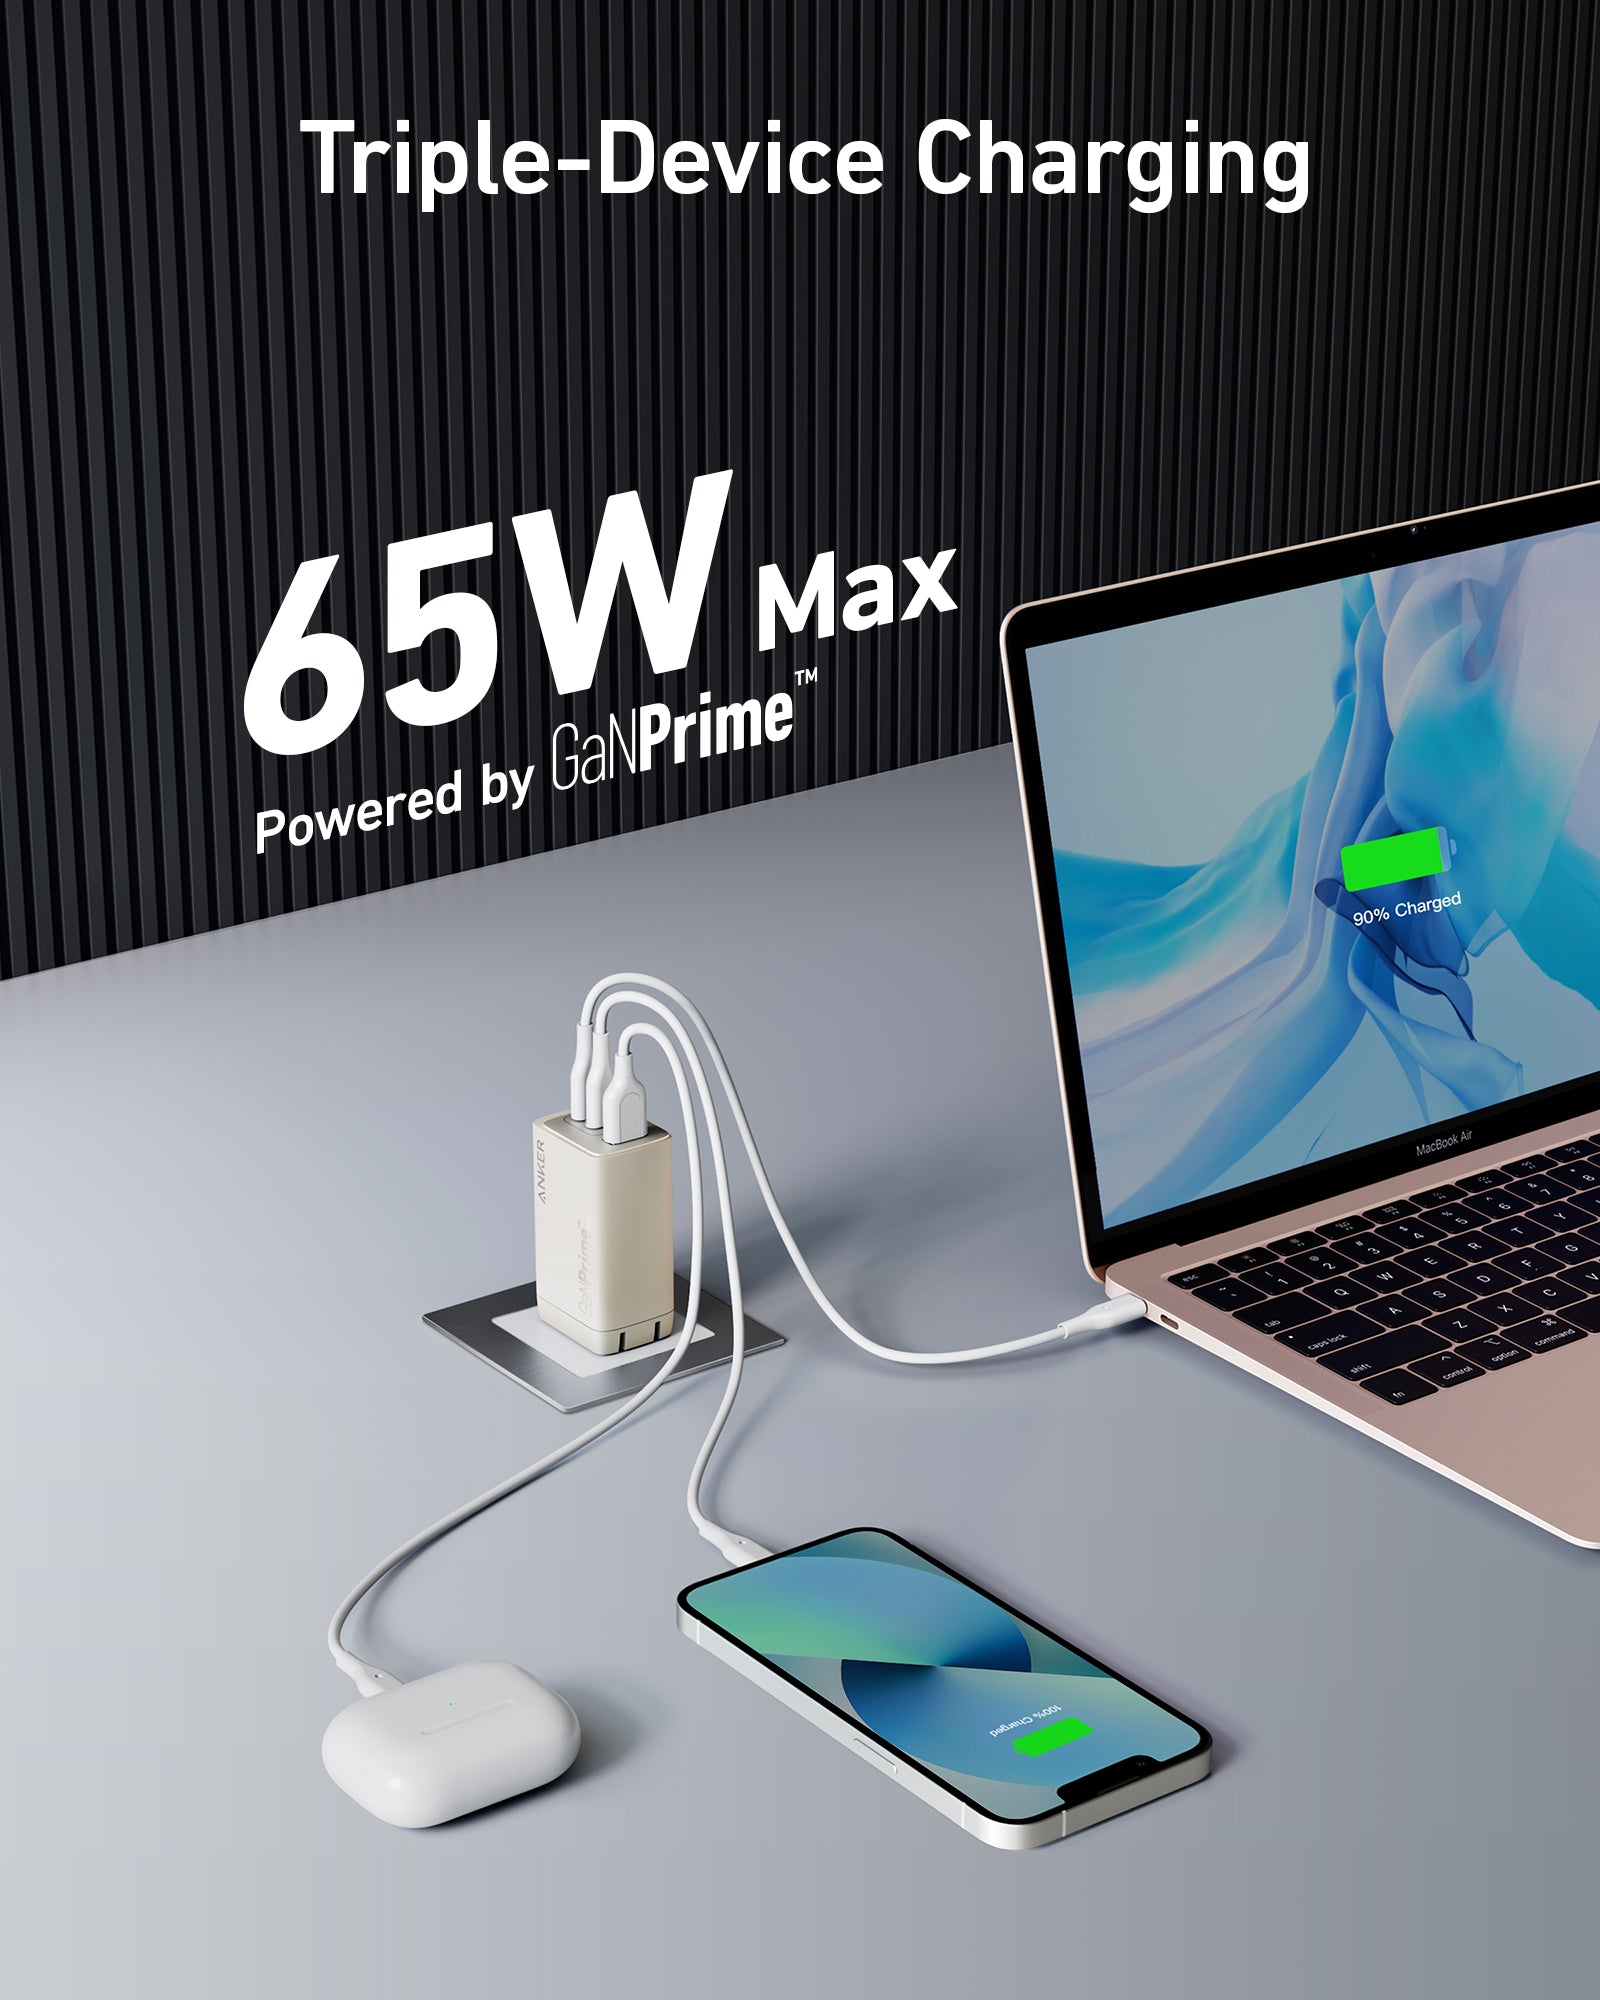 Chargeur USB C Anker 735 (GaNPrime 65W), Chargeu…